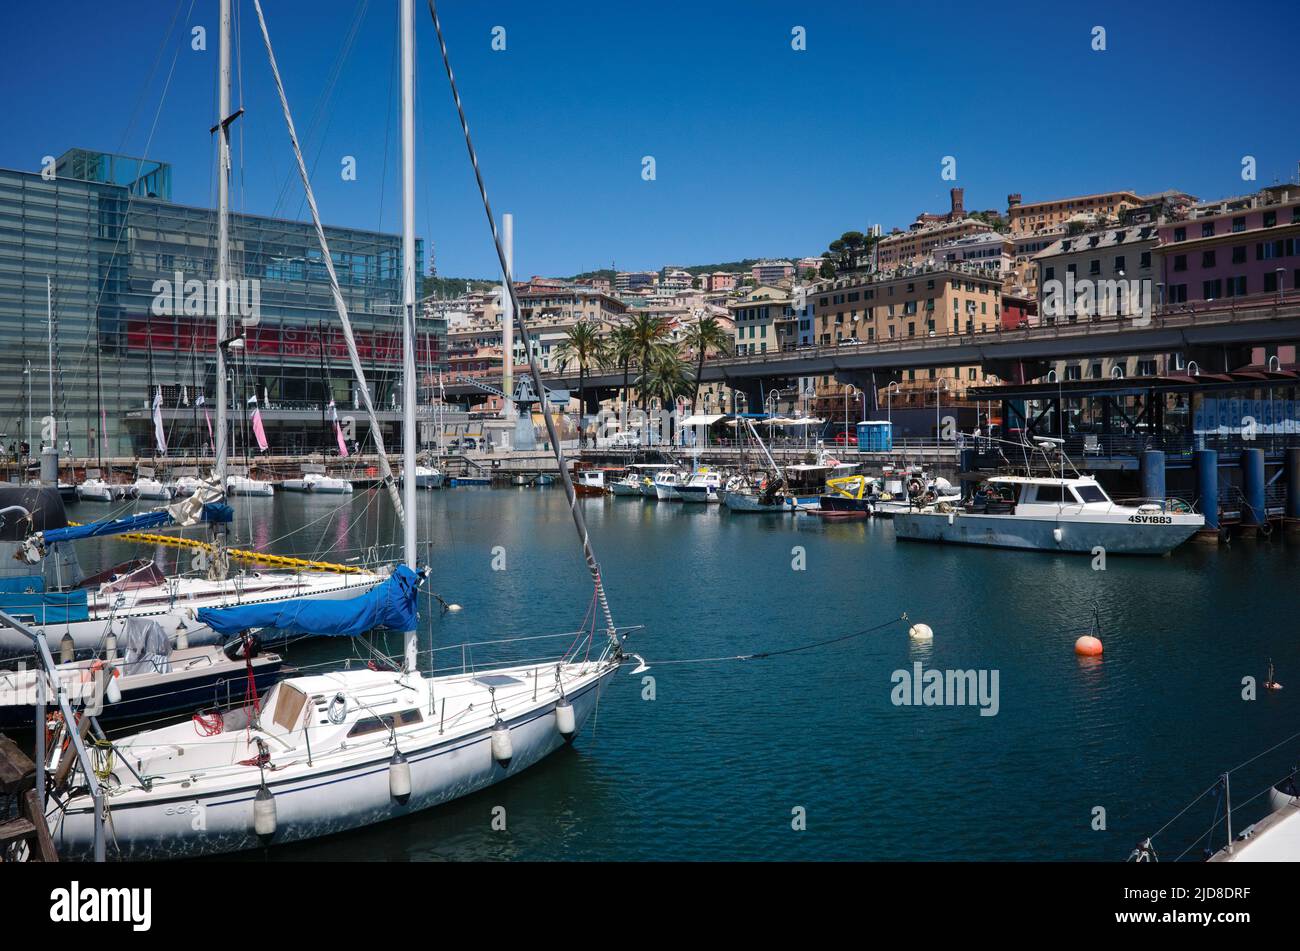 Genoa, Italy - June, 2022: Marina for yachts and boats in port of Genova. Building of maritime museum called Galata Museo del Mare in backgroun Stock Photo